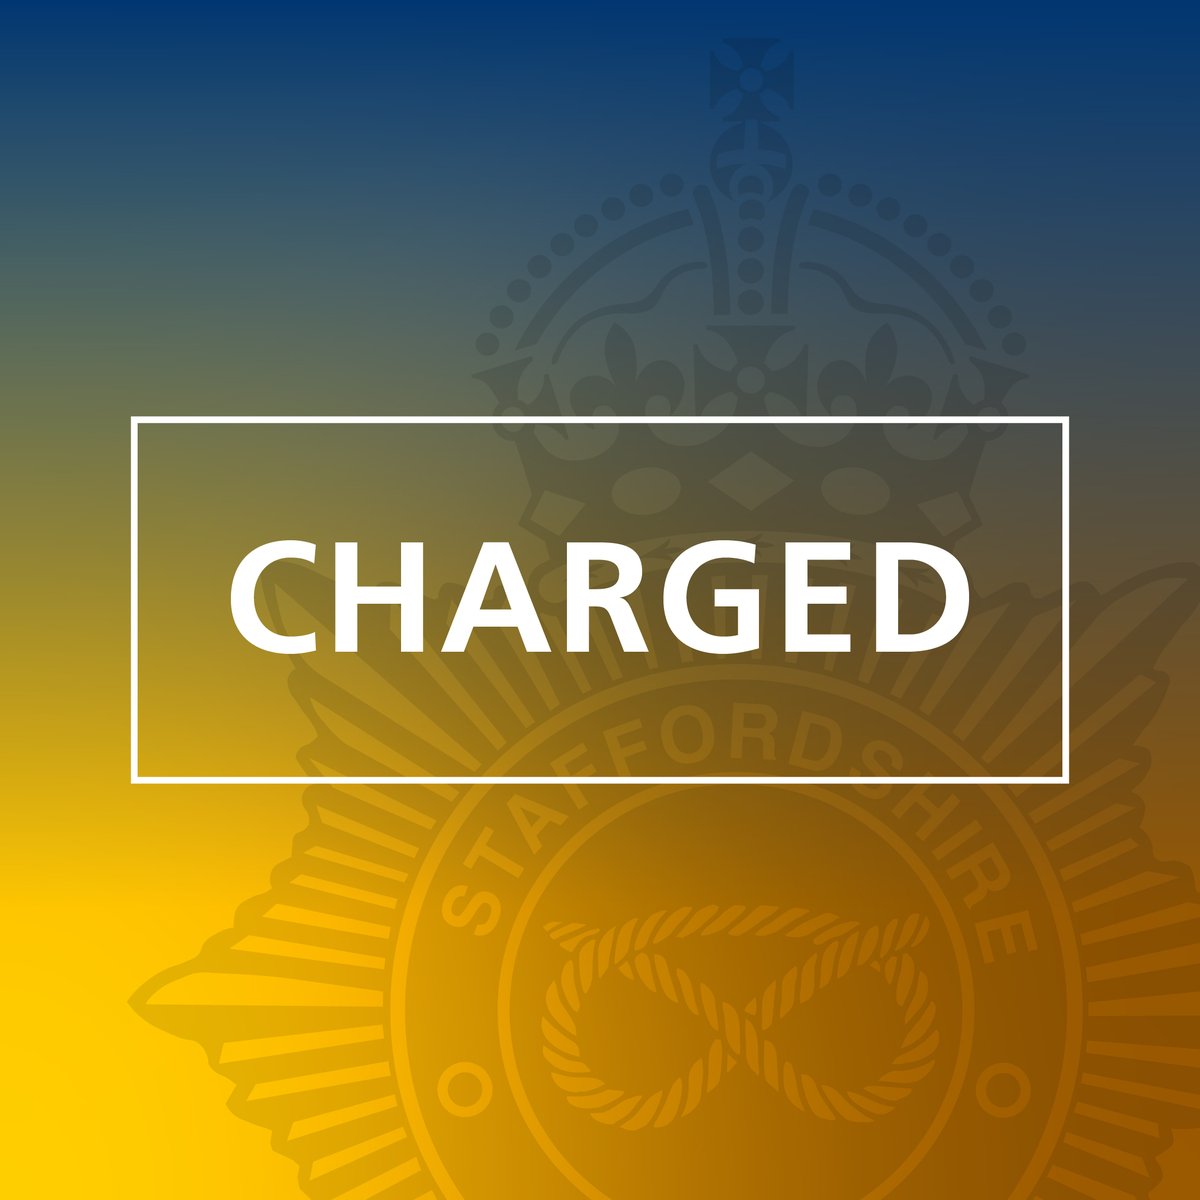 A man has been charged with driving offences after a BMW drove on the wrong side of the A5 in Lichfield. Read more here: orlo.uk/doLX6